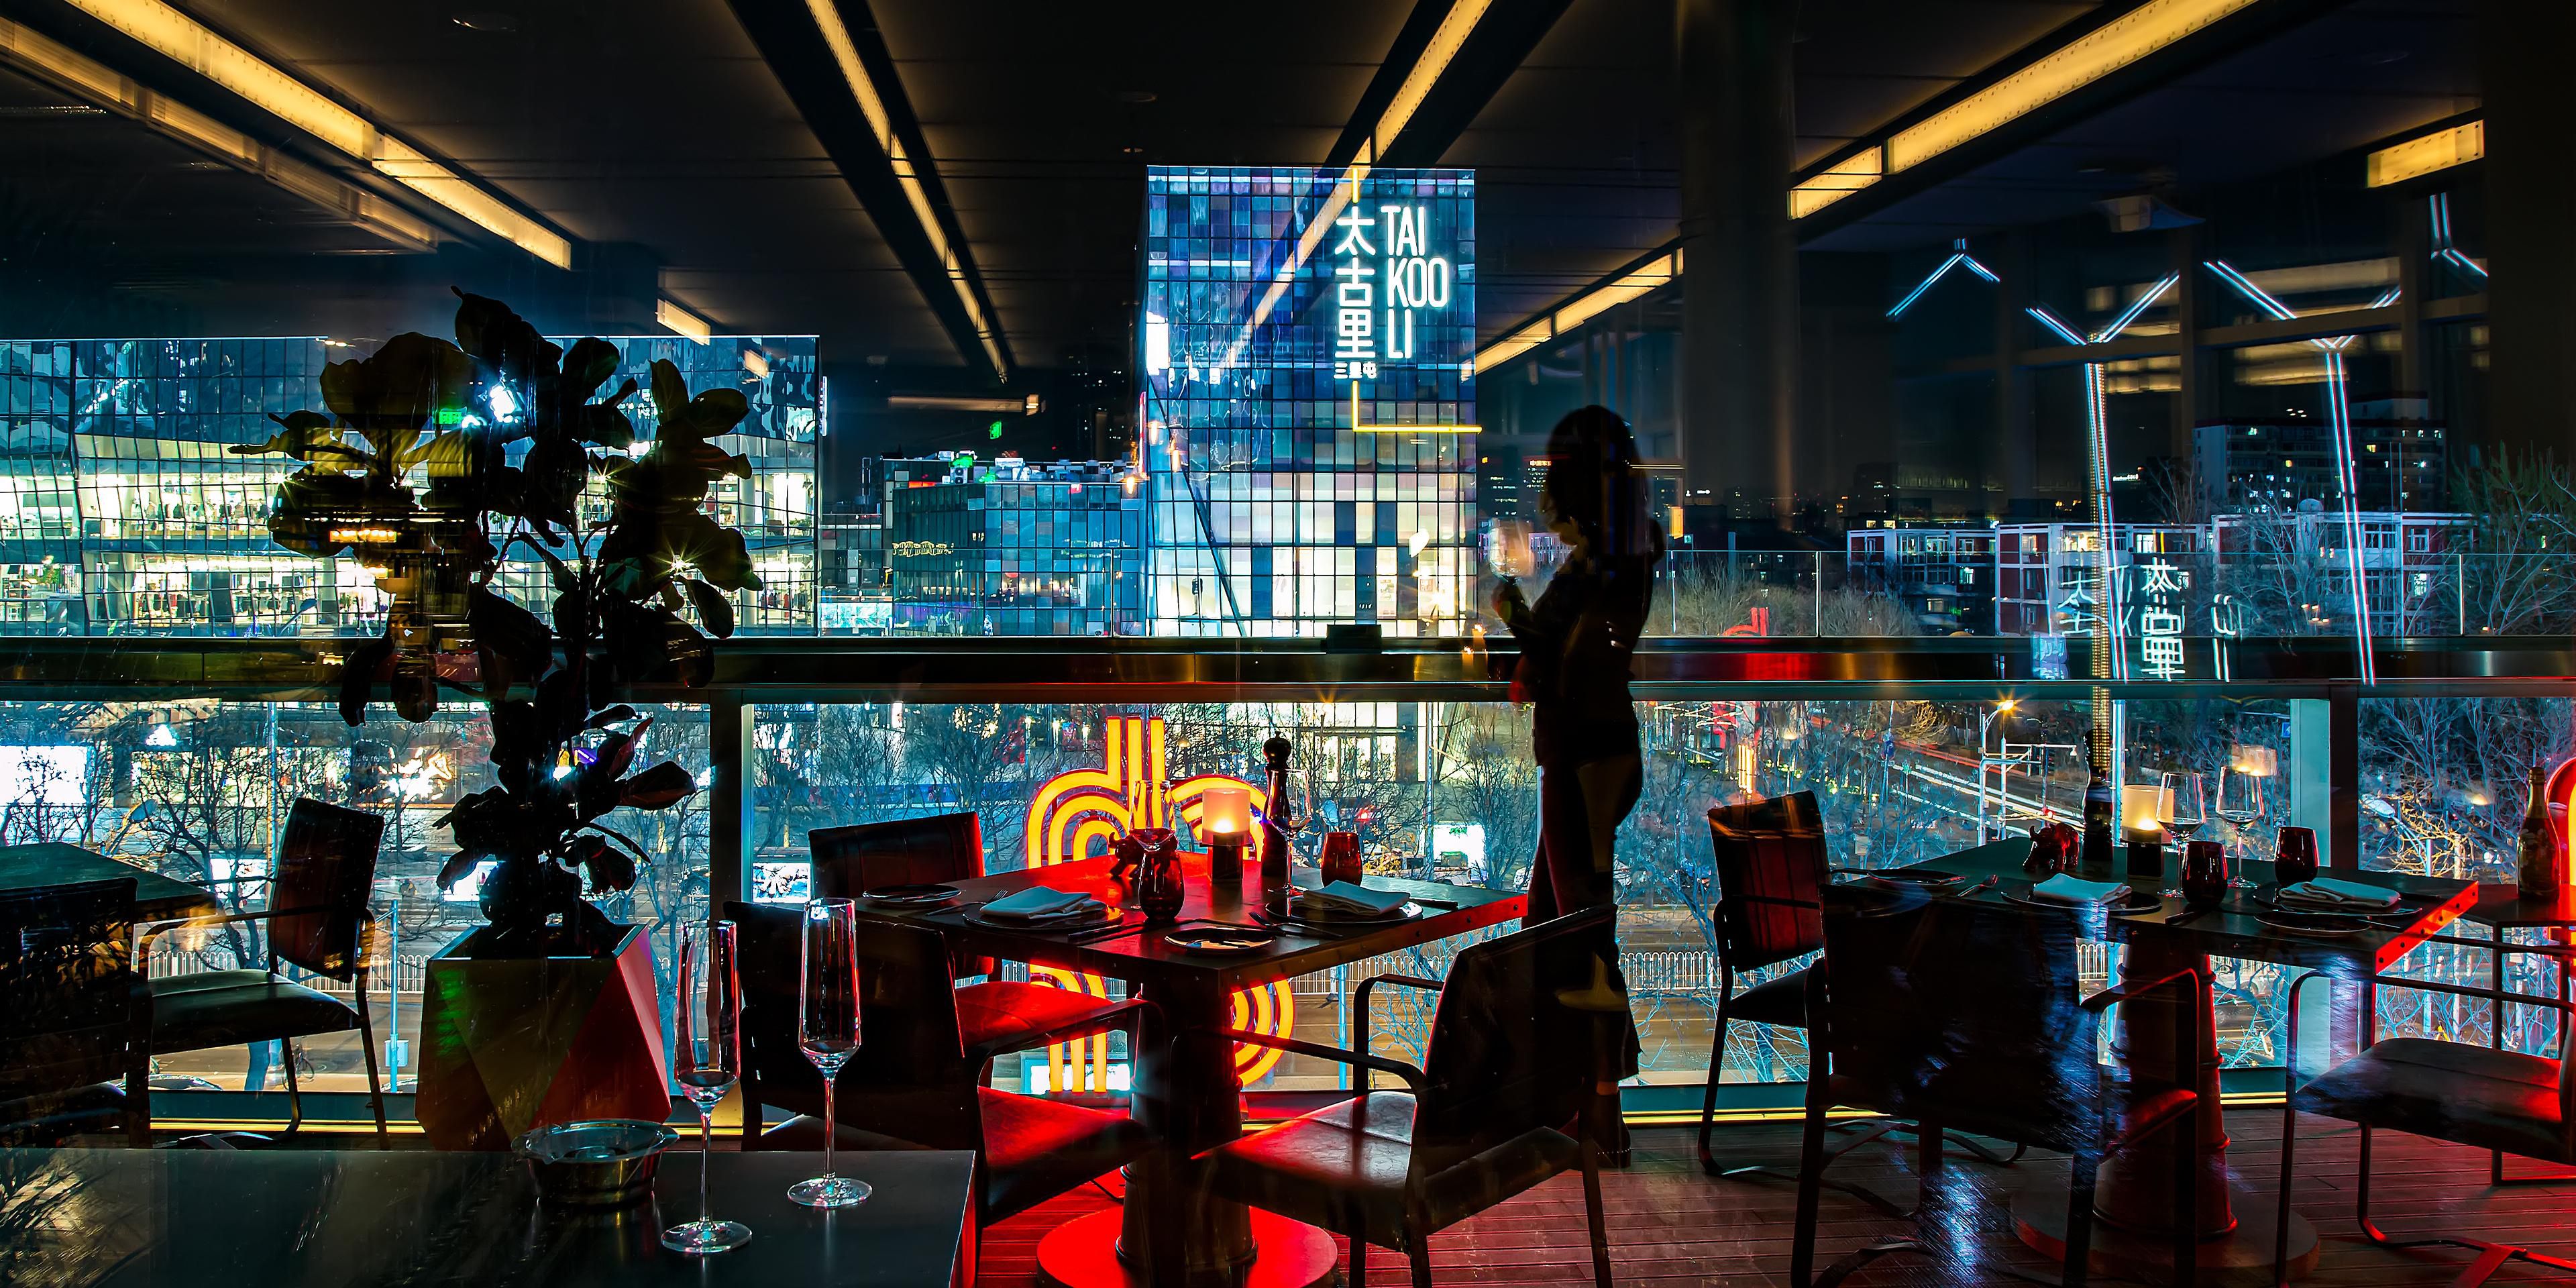 The Michelin-awarded and Black Pearl One Diamond recipient CHAR Bar & Grill presents a premium steak and wine experience, with spectacular views of Sanlitun. Enjoy an elevated experience at CHAR Bar & Grill, with modern vibes and open dining environment.